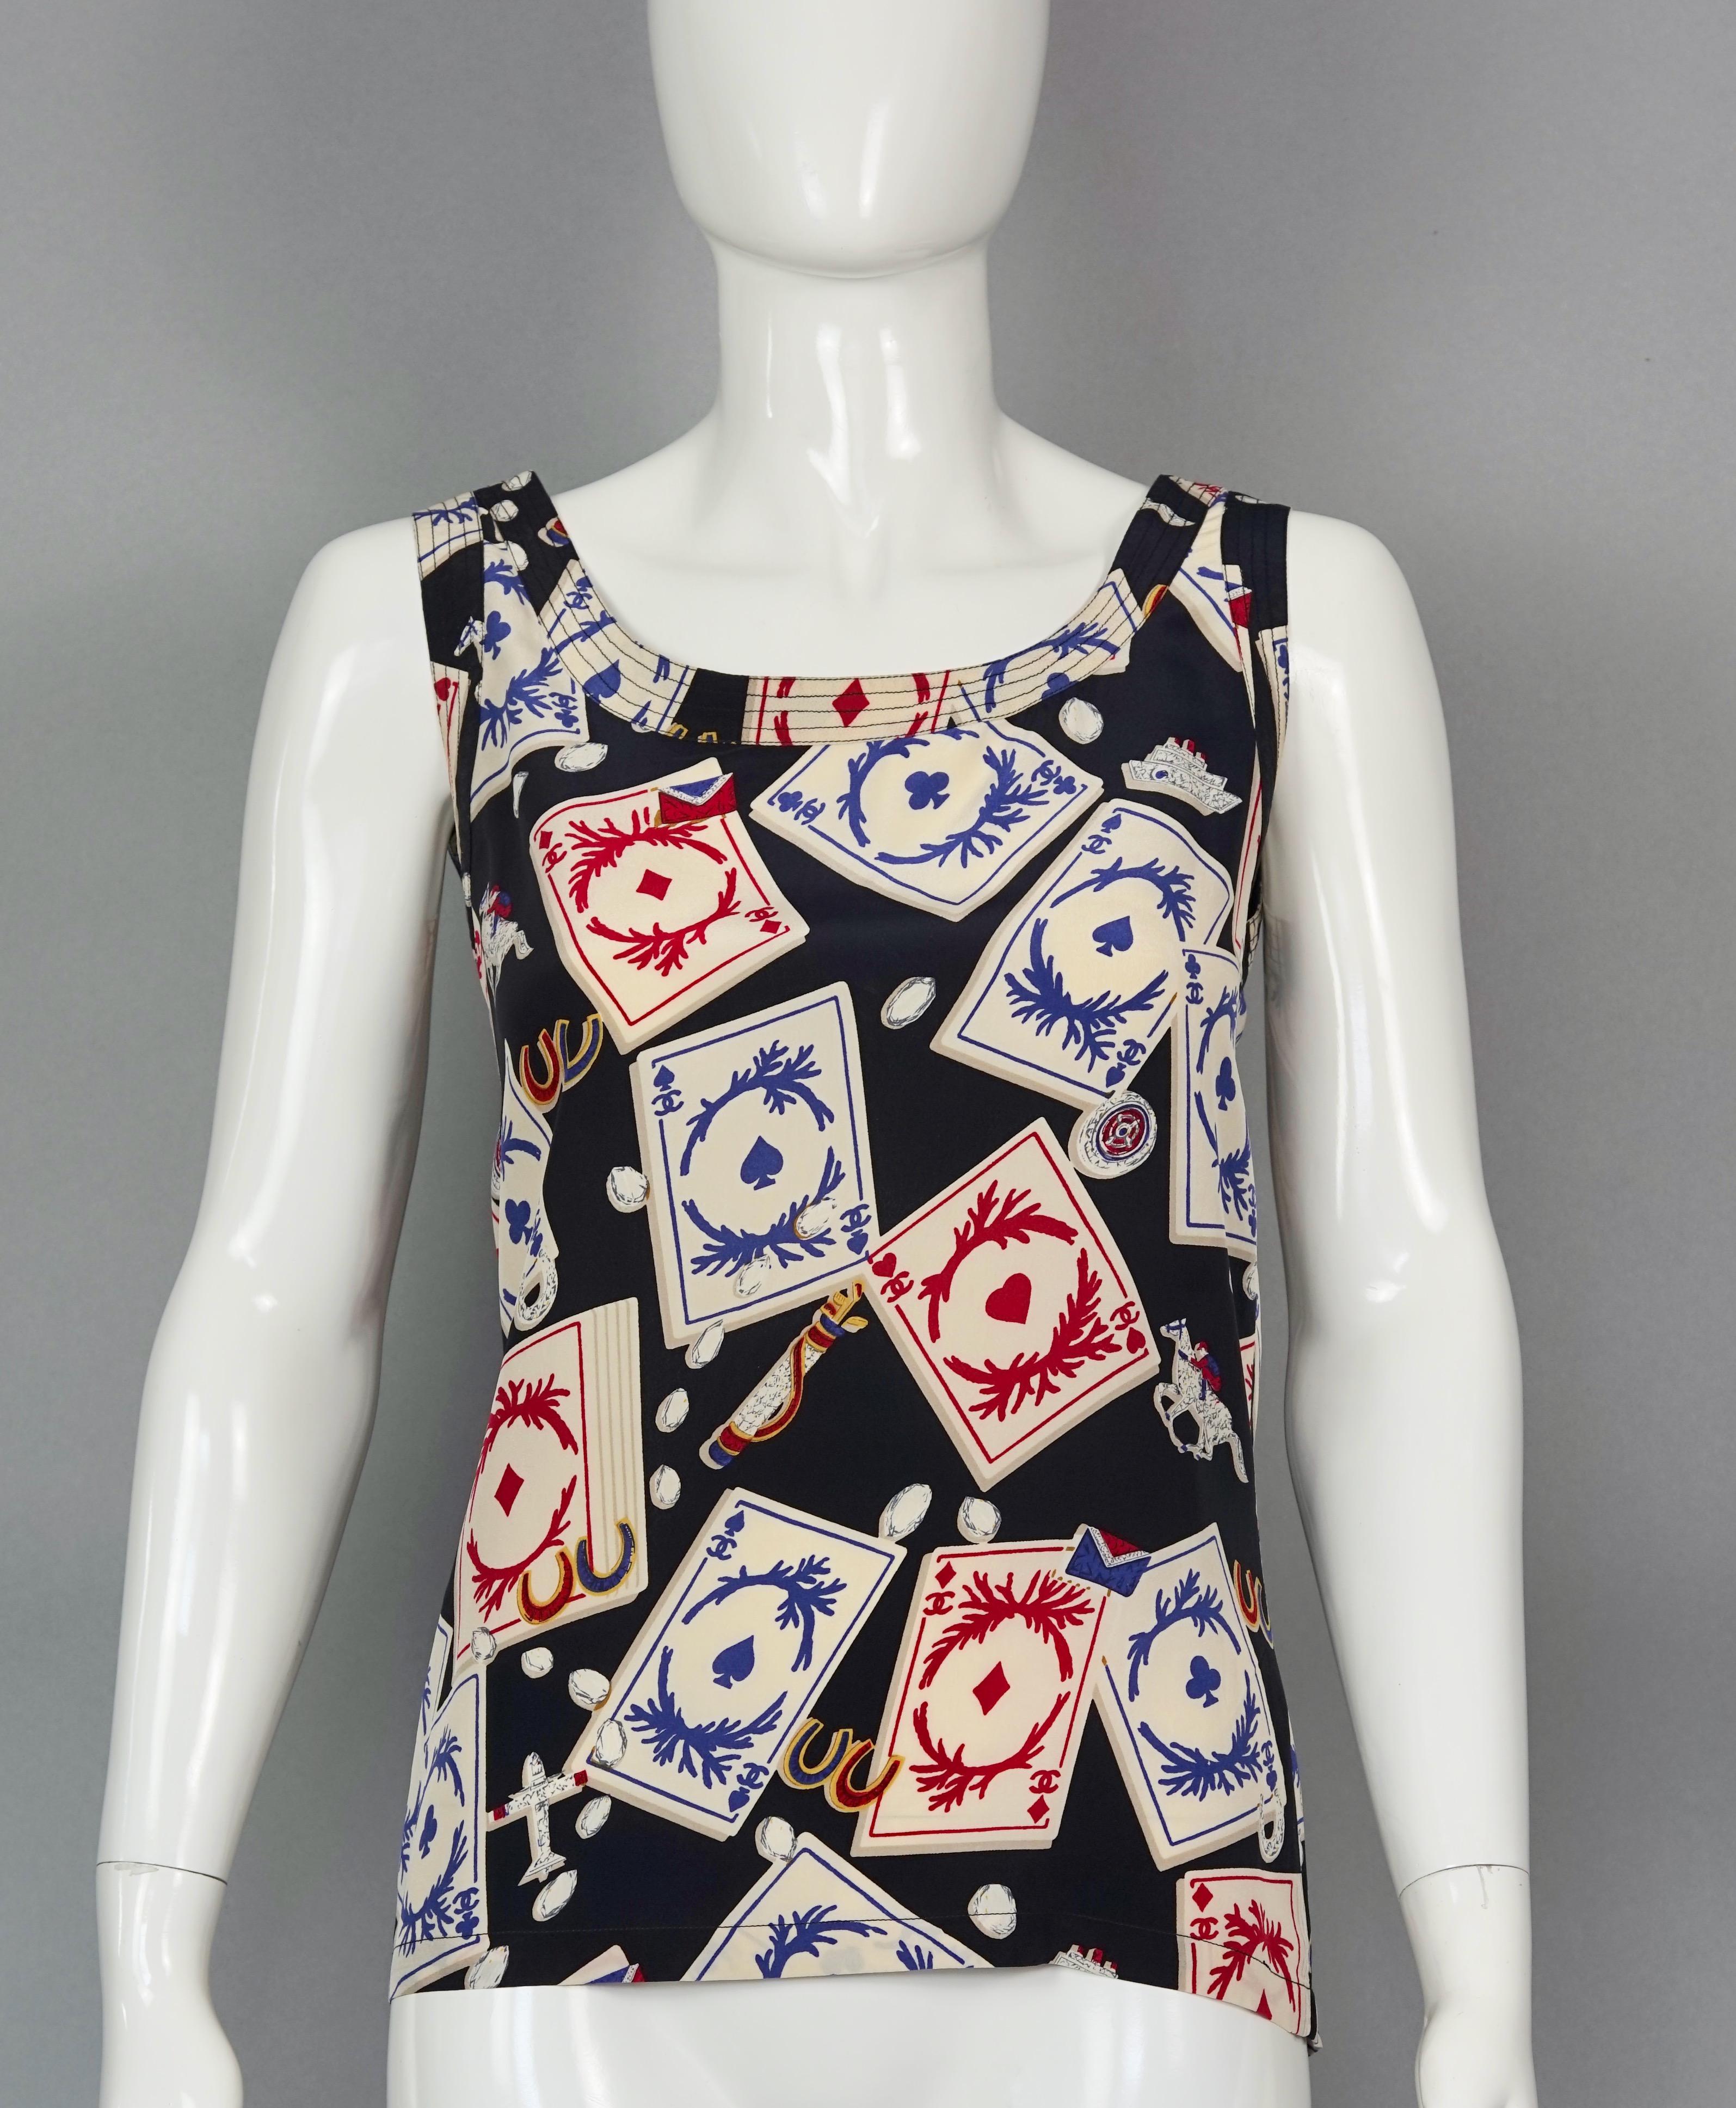 Vintage 1995 CHANEL Playing Cards Print CC Logo Button Silk Top

Measurements taken laid flat, please double bust, waist and hips:
Shoulder: 14.56 inches (37 cm)
Bust: 16.92 inches (43 cm)
Waist: 16.53 inches (42 cm)
Length: 23.62 inches (60